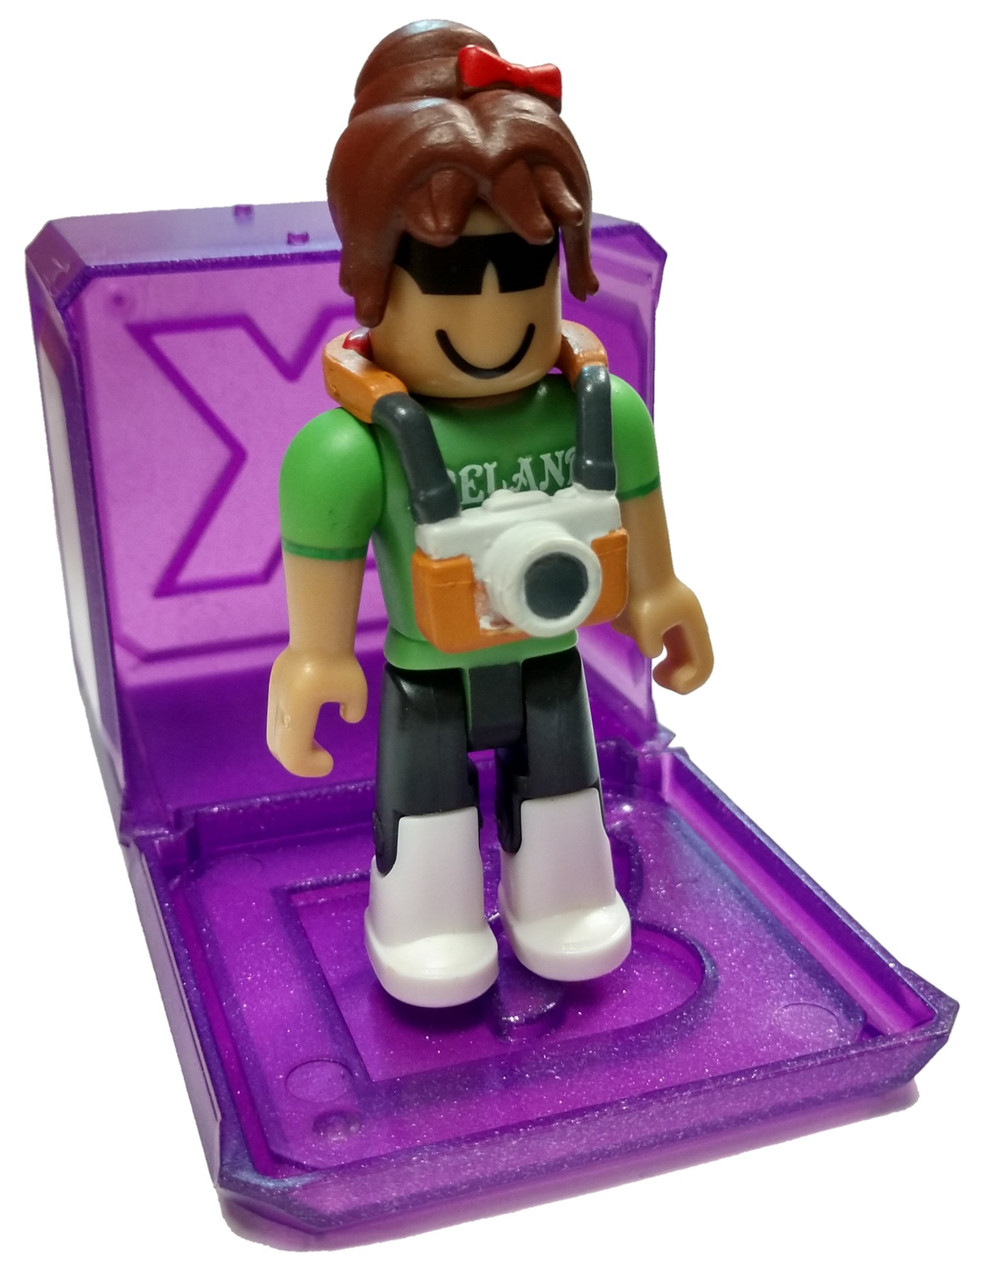 Roblox Celebrity Collection Series 3 World Expedition Ireland Itinerant 3 Mini Figure With Cube And Online Code Loose Jazwares Toywiz - details about roblox celebrity core figure pack series 1 assorted brand new x4